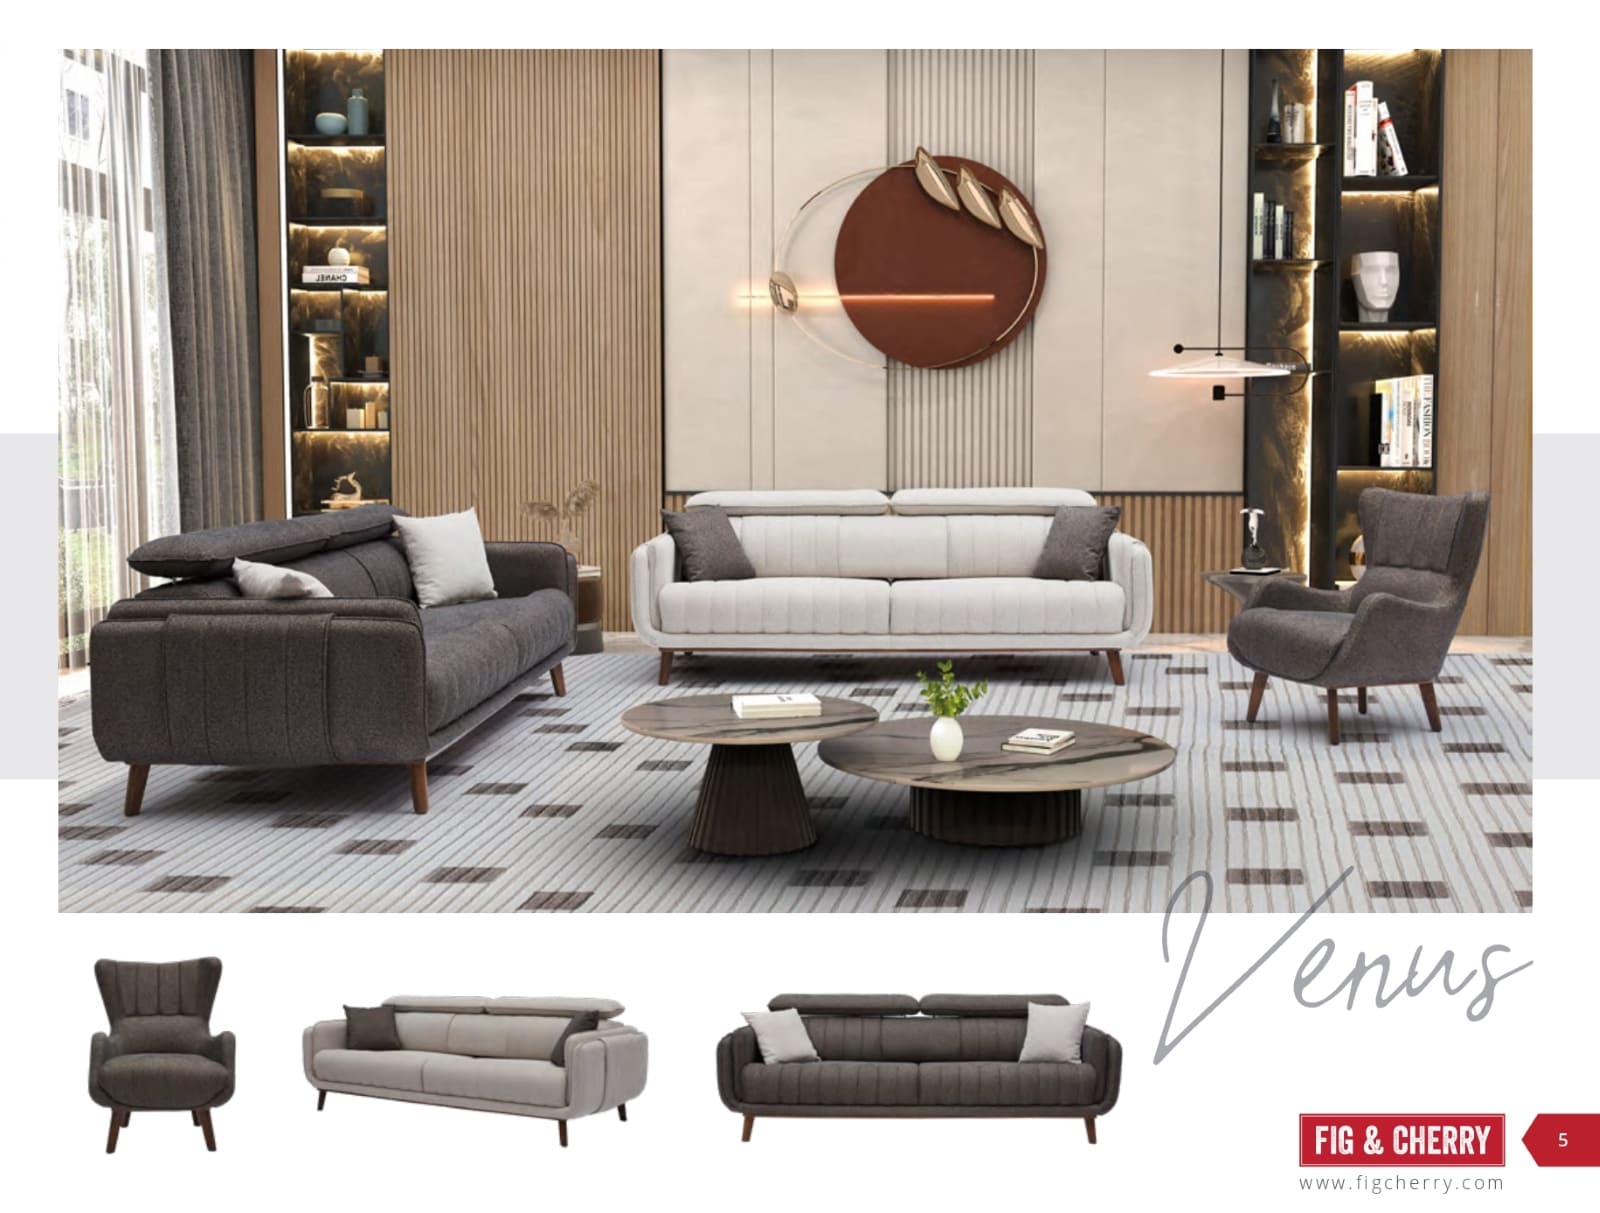 Fig & Cherry Indoor Collection (Sofas and Sectionals) Catalog (5)